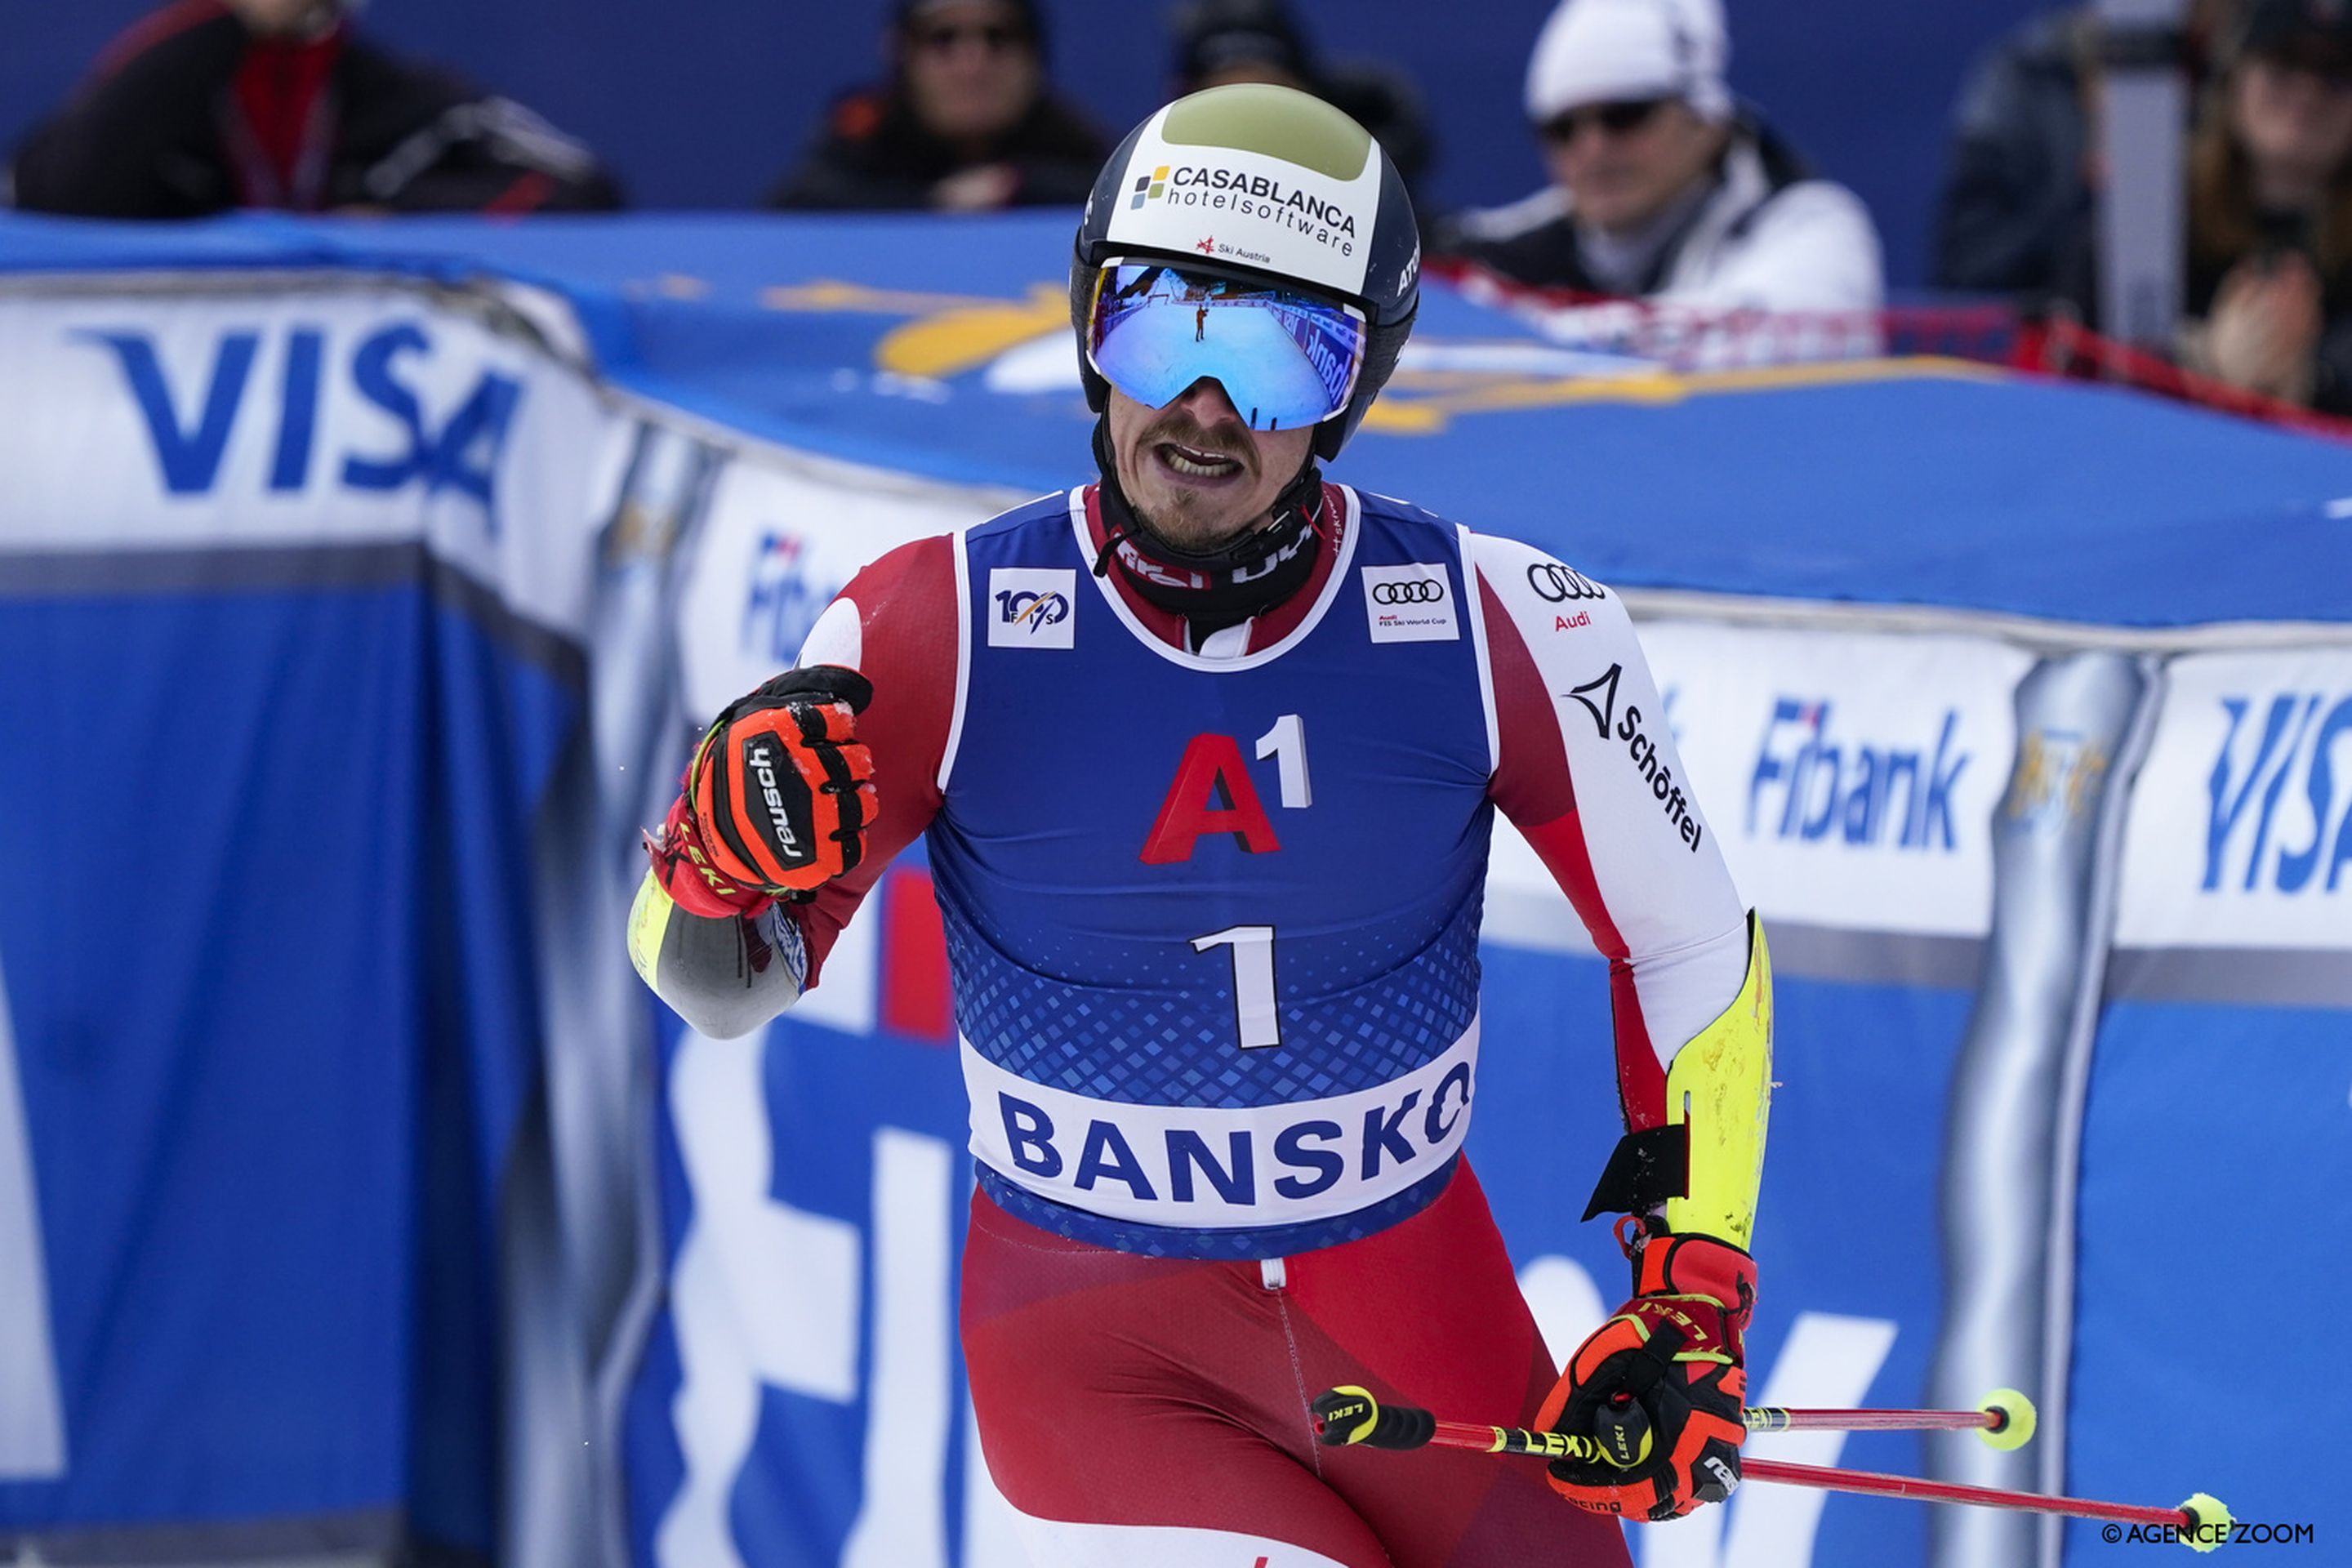 Feller shows his approval in the Bansko finish area (Agence Zoom)